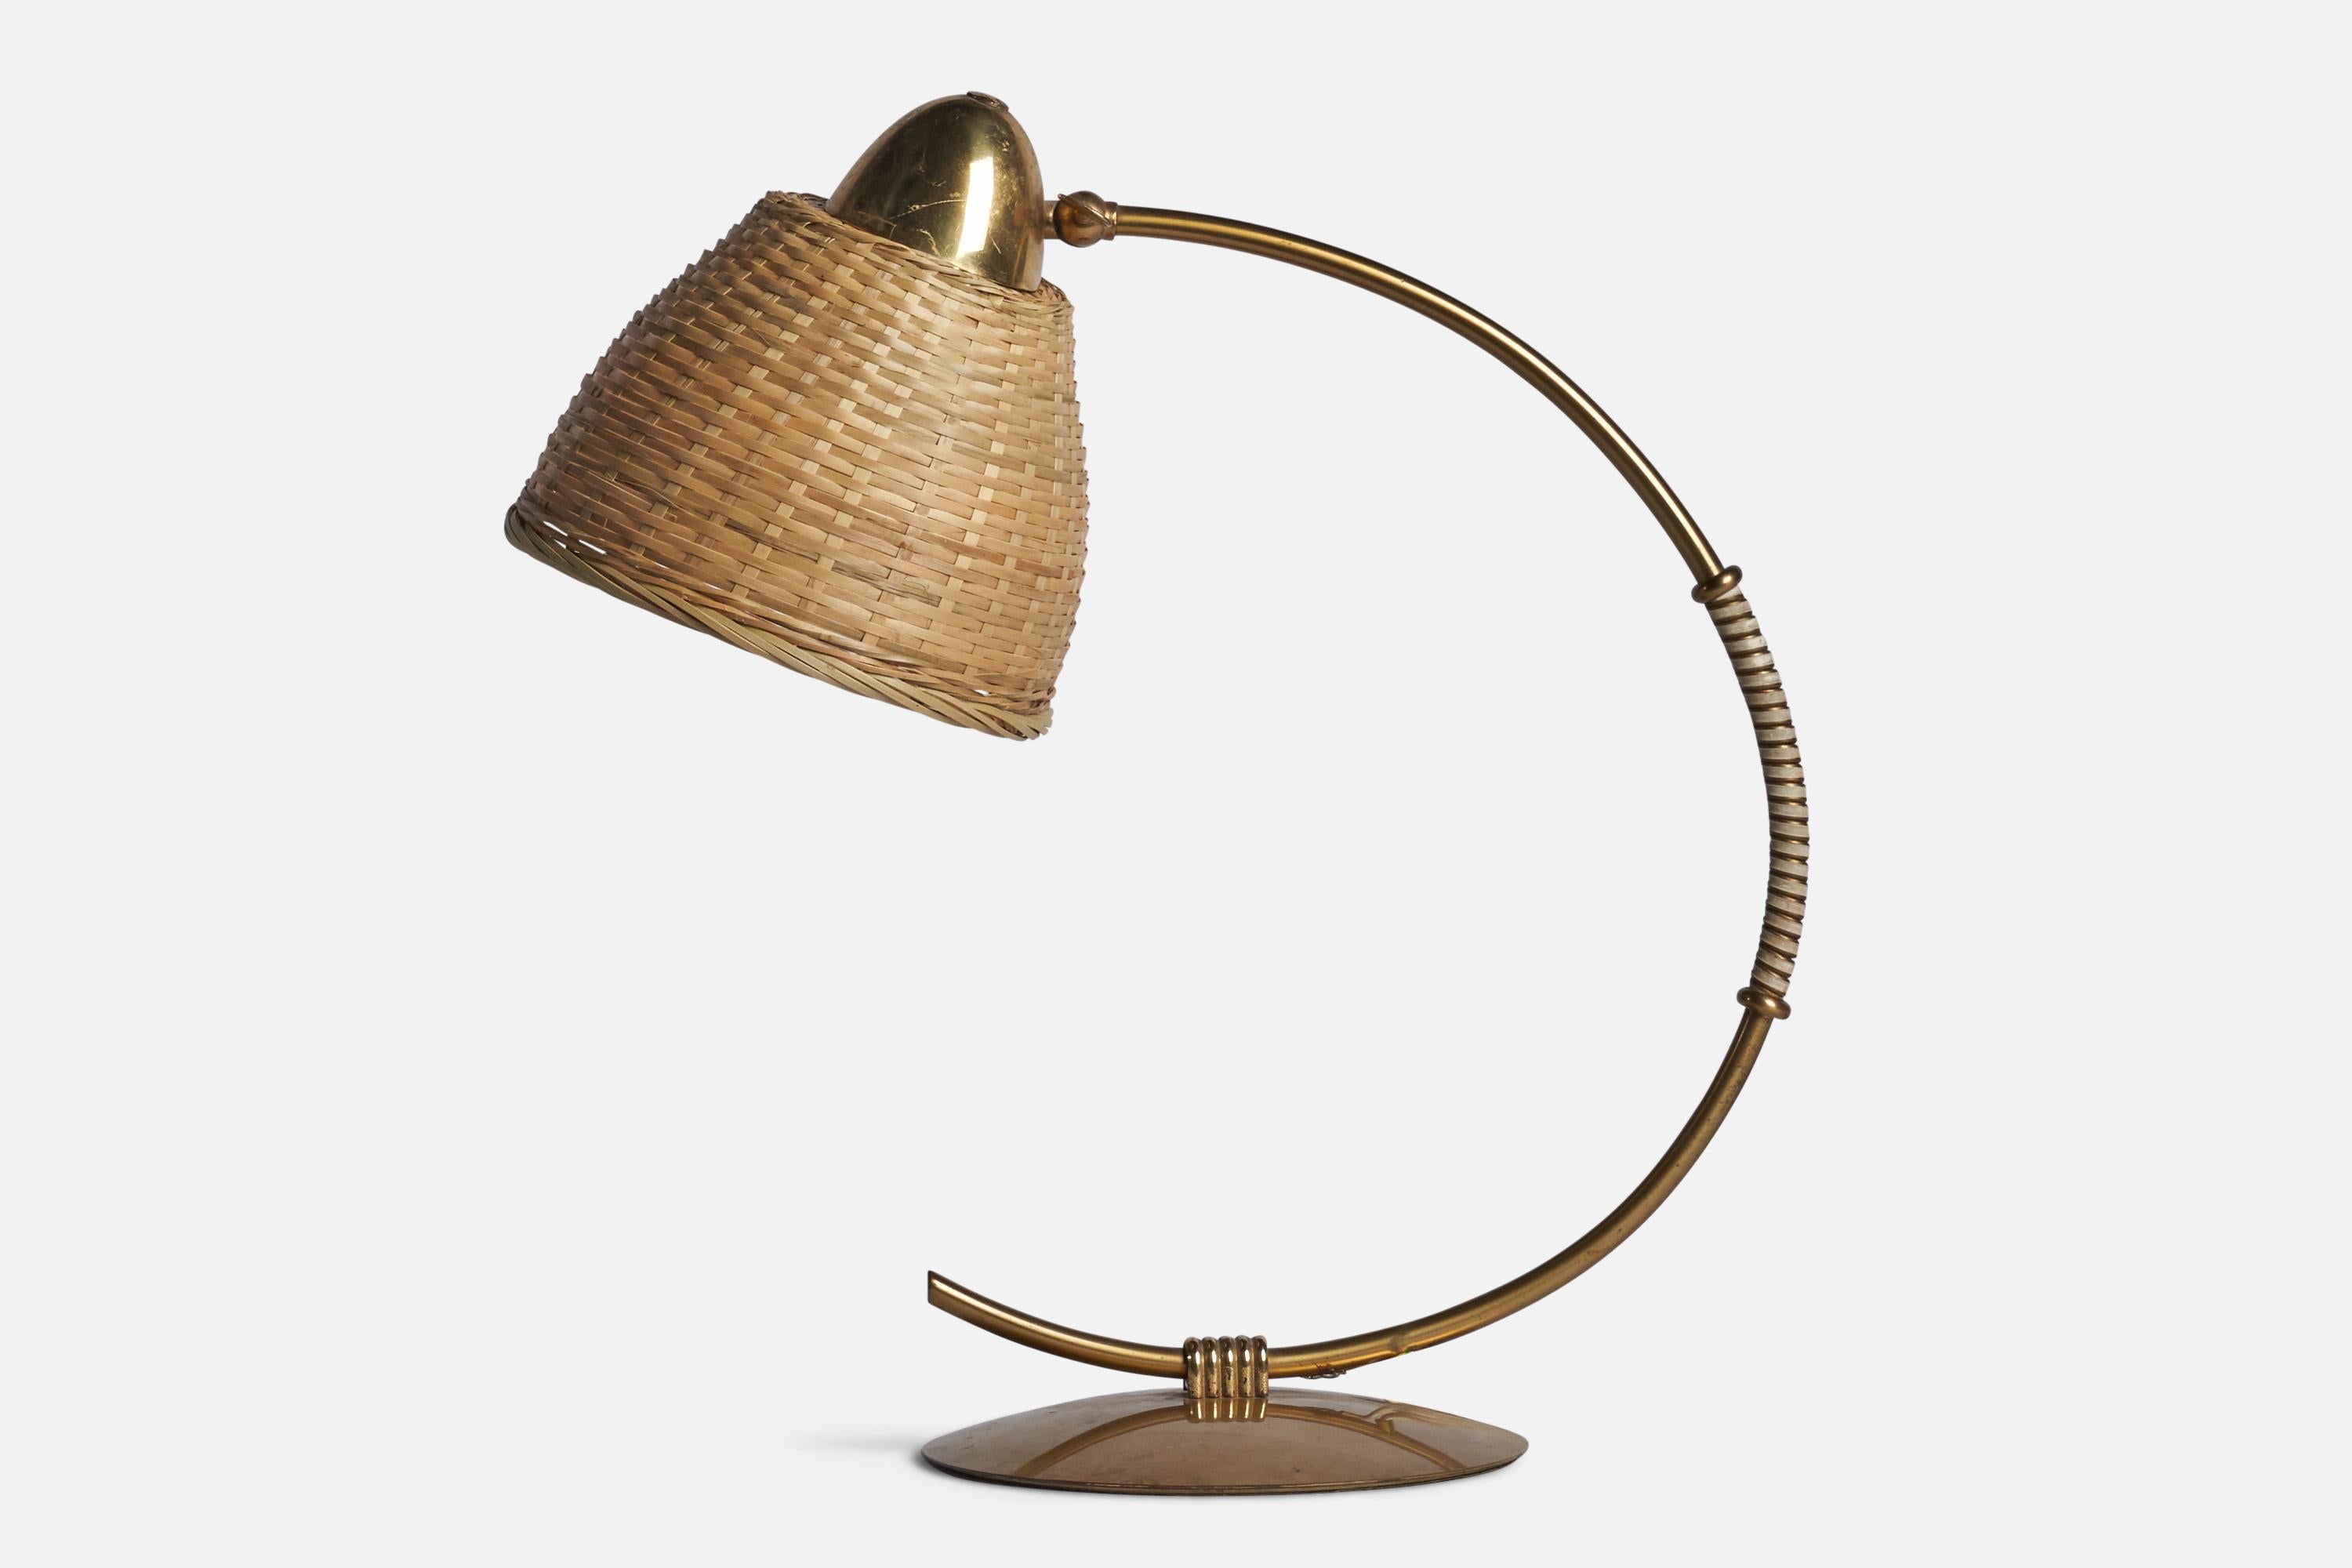 
A curved brass and rattan table lamp designed by Pitt Müller, Germany, 1950s.
Overall Dimensions (inches): 16.25